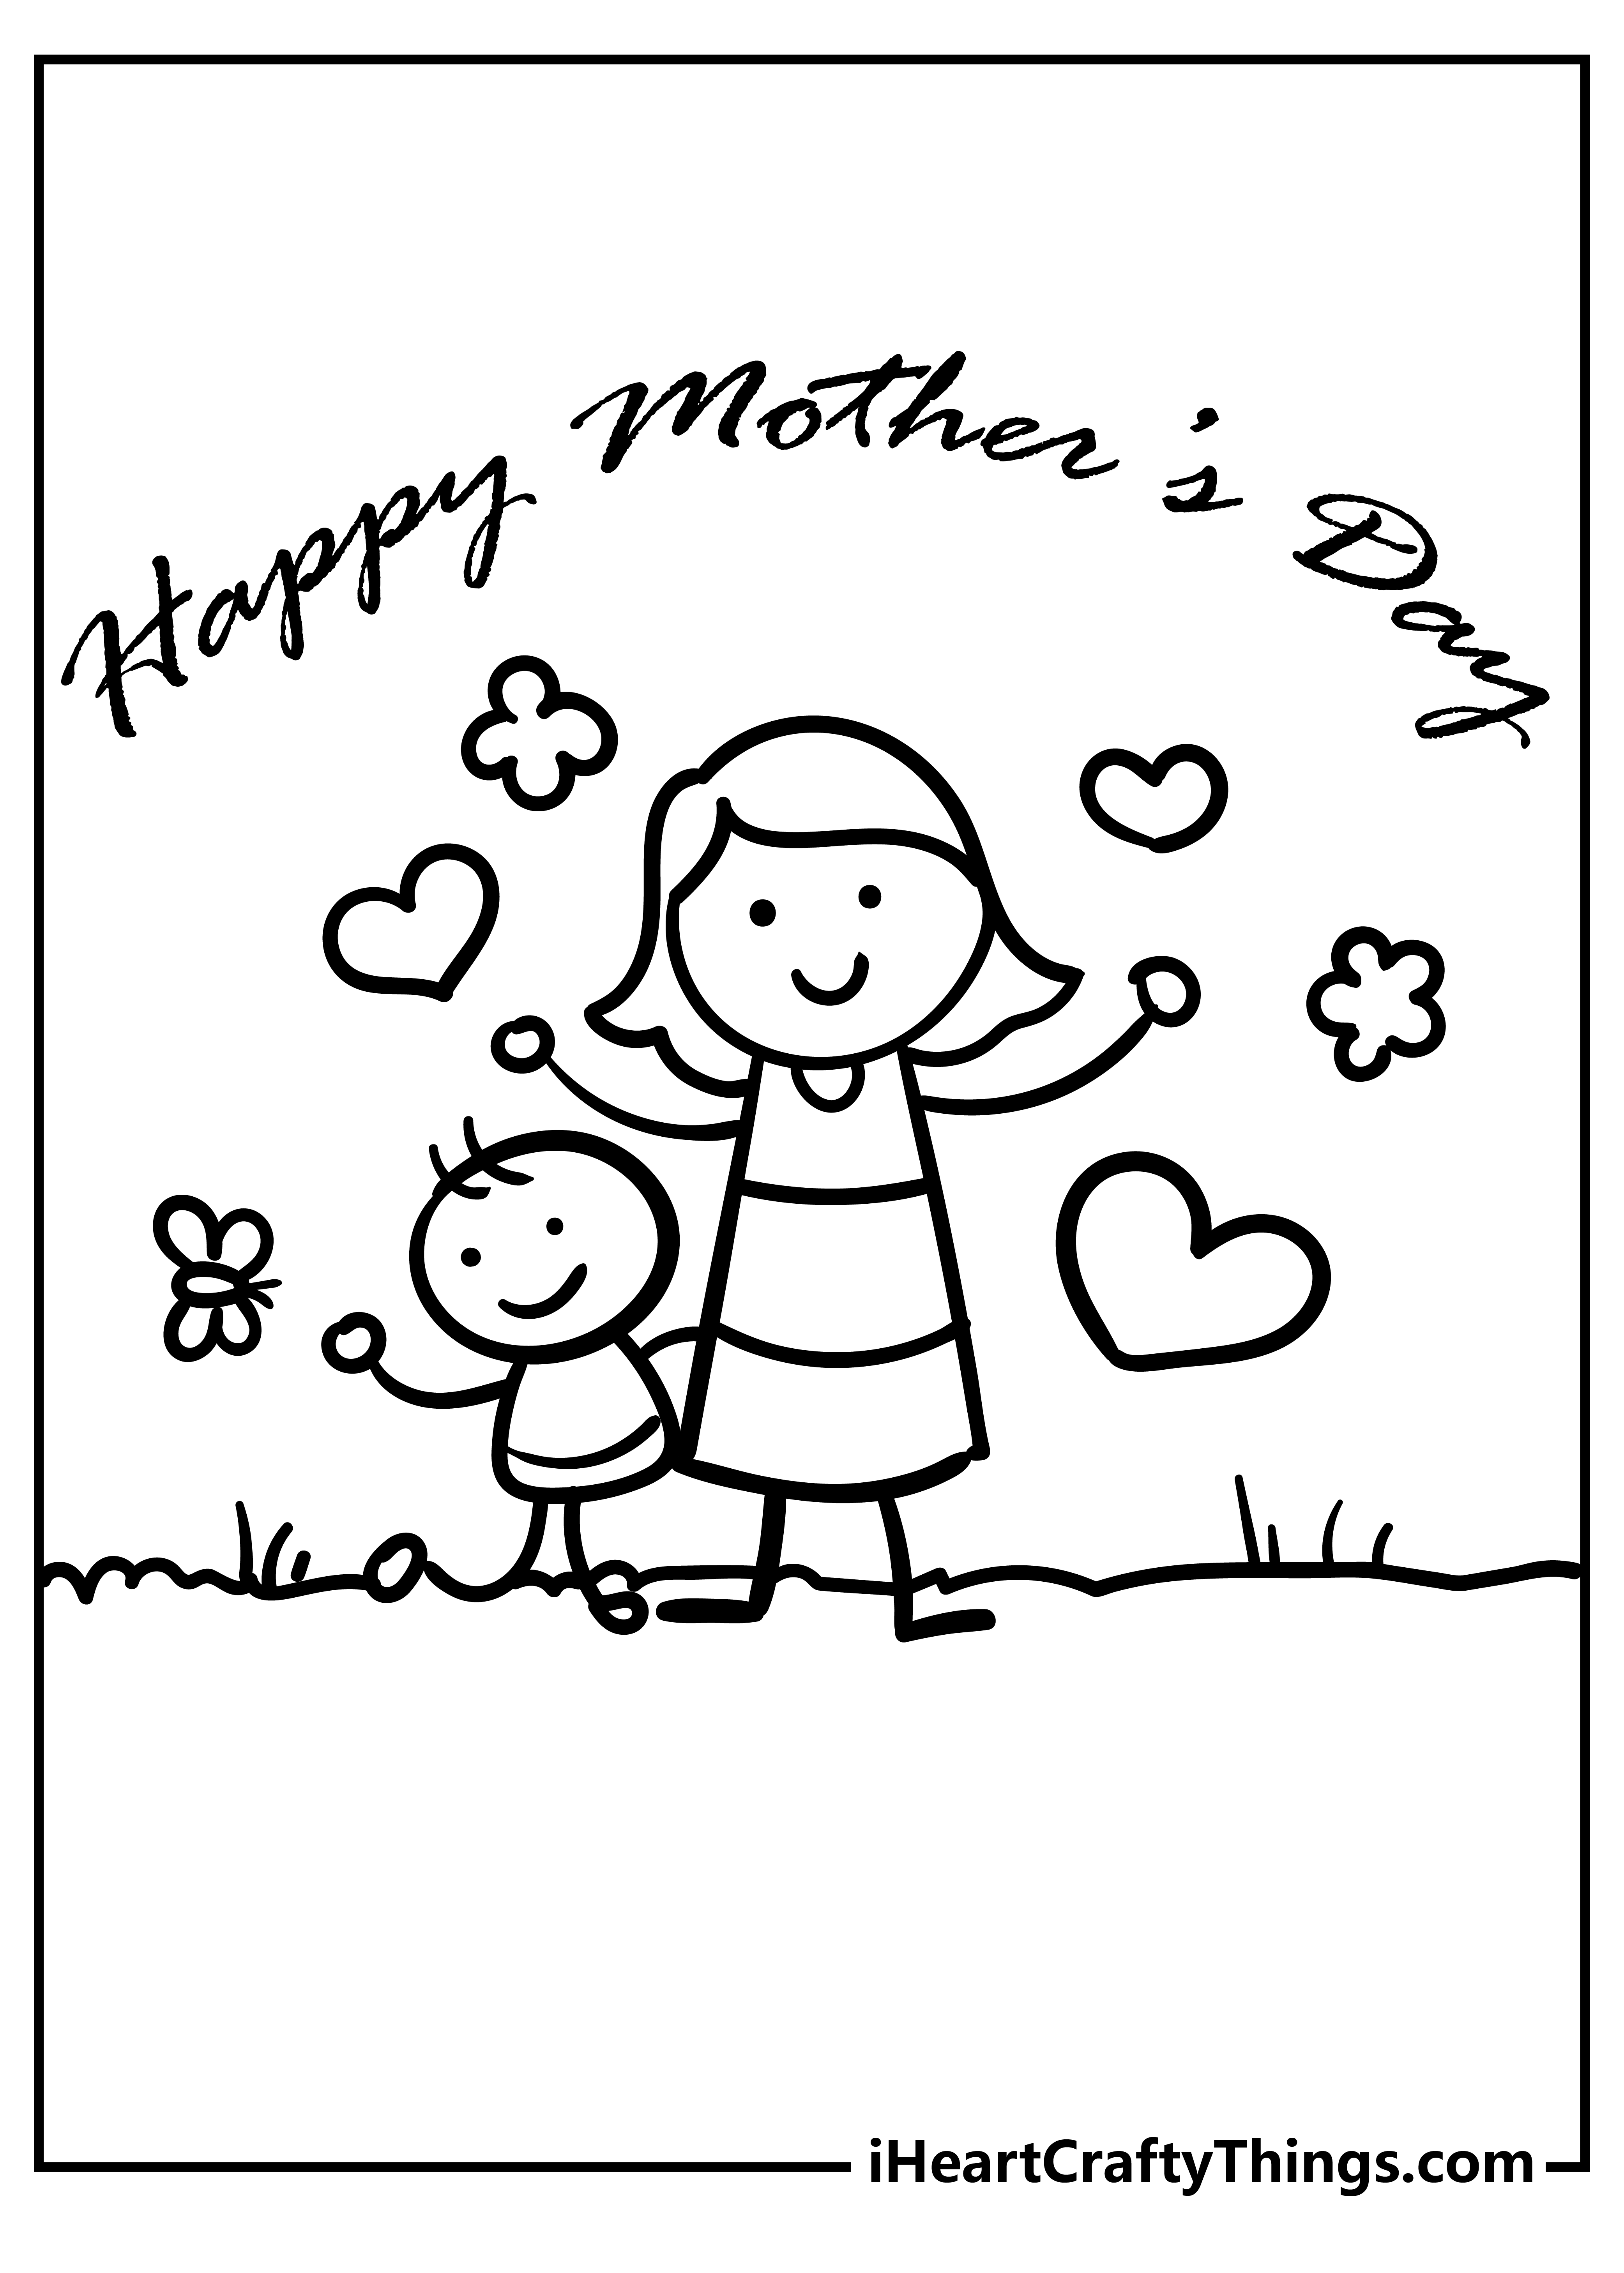 Mother’s Day Coloring Sheet for children free download